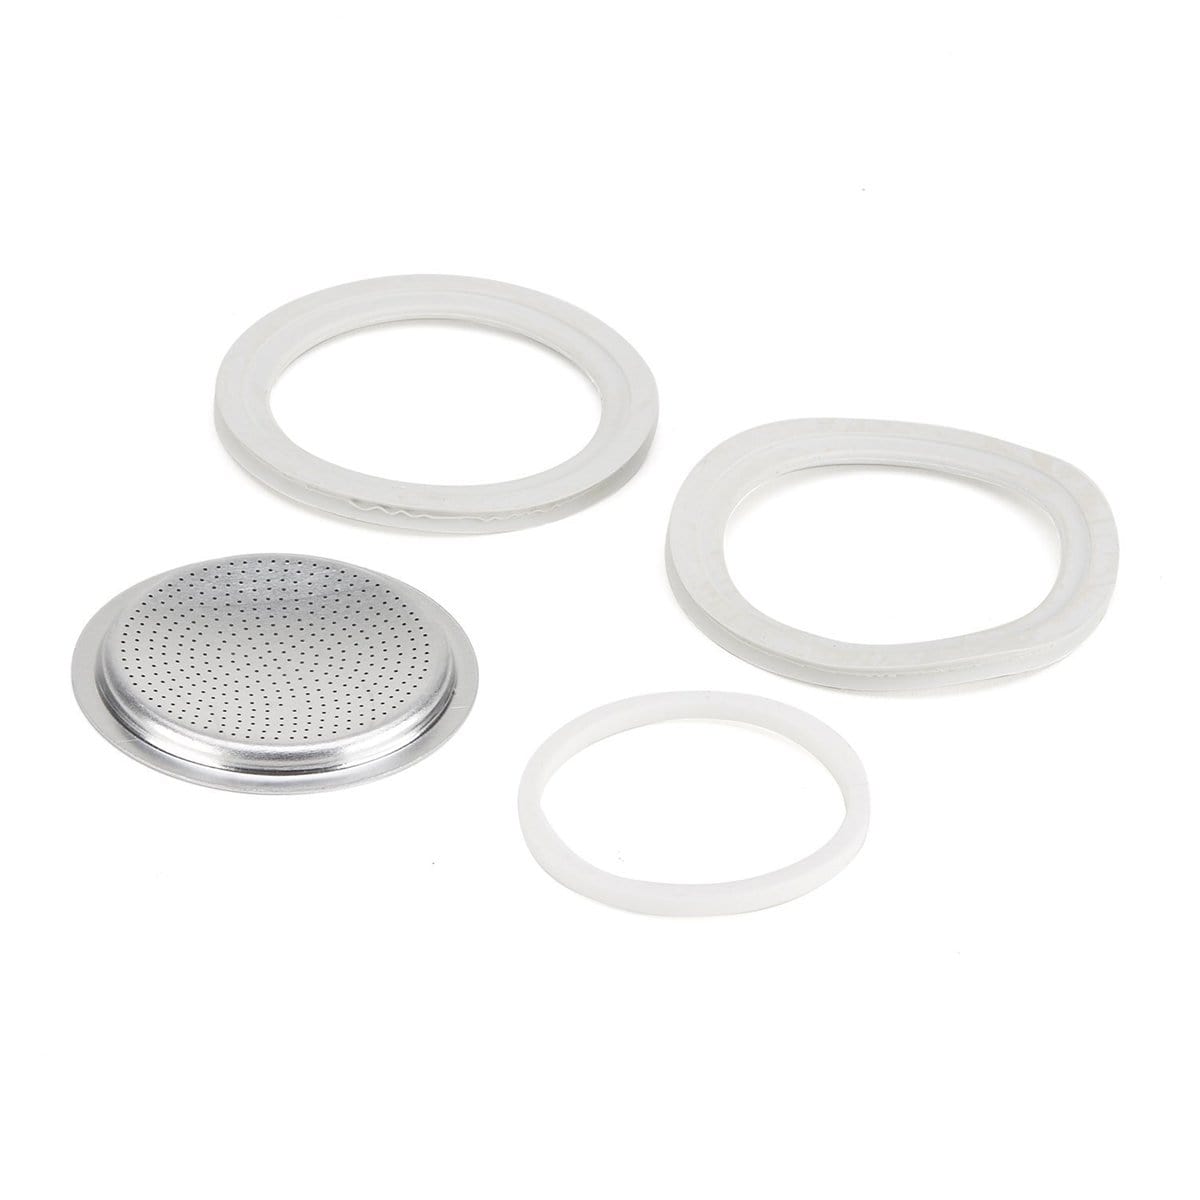 Bialetti Replacement Gasket and Filter Plate for Moka Pots – Teravan